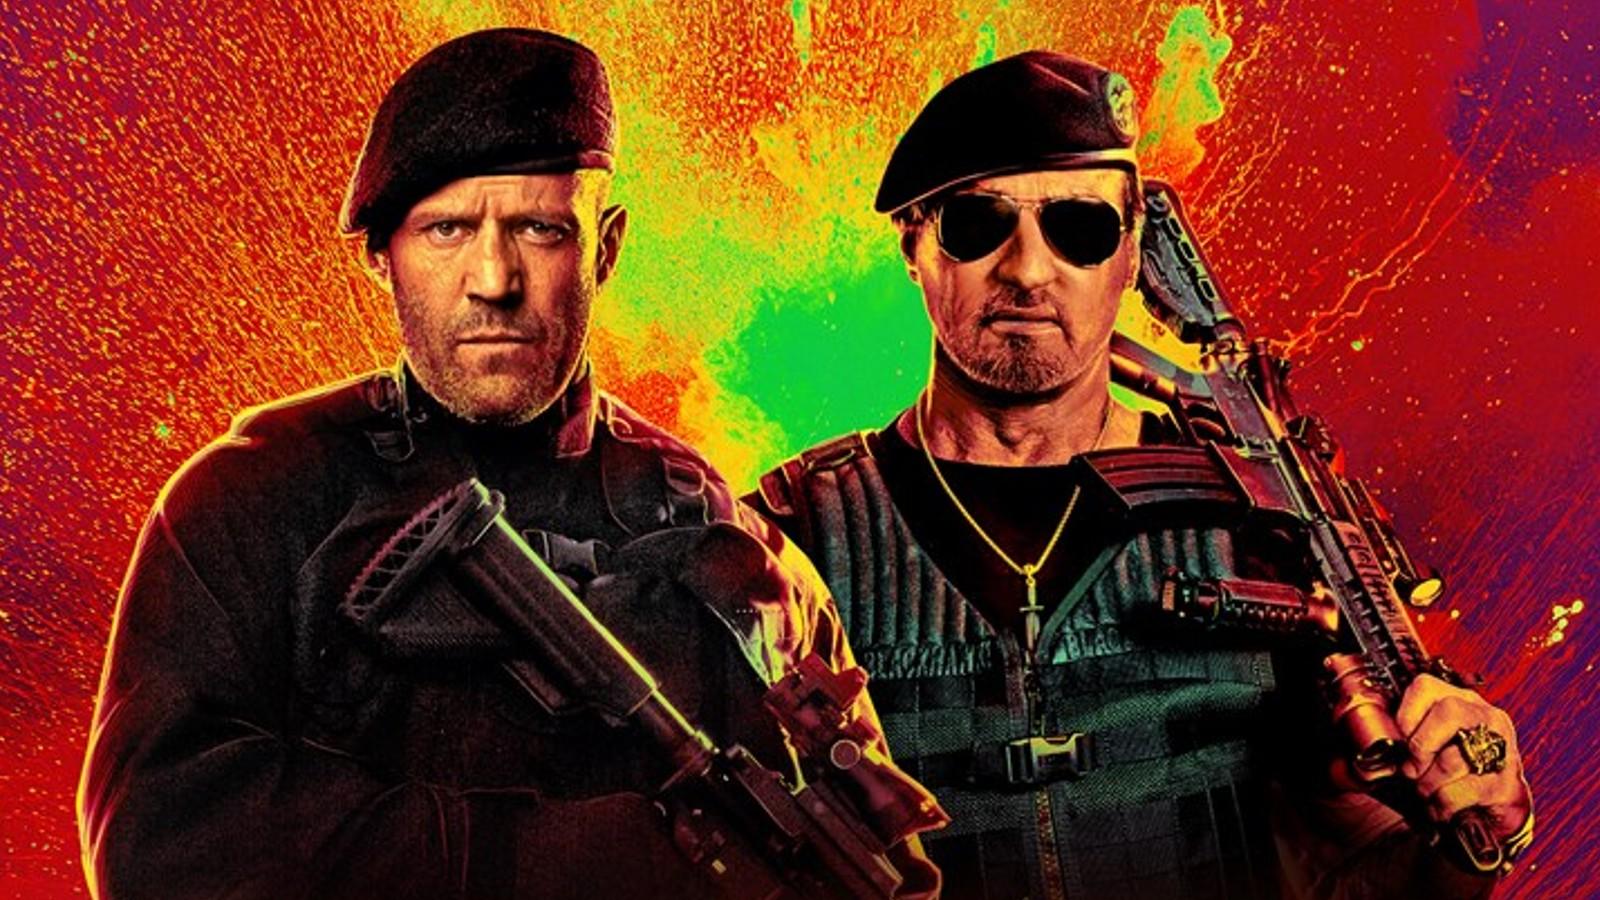 Jason Statham and Sylvester Stallone in The Expendables 4